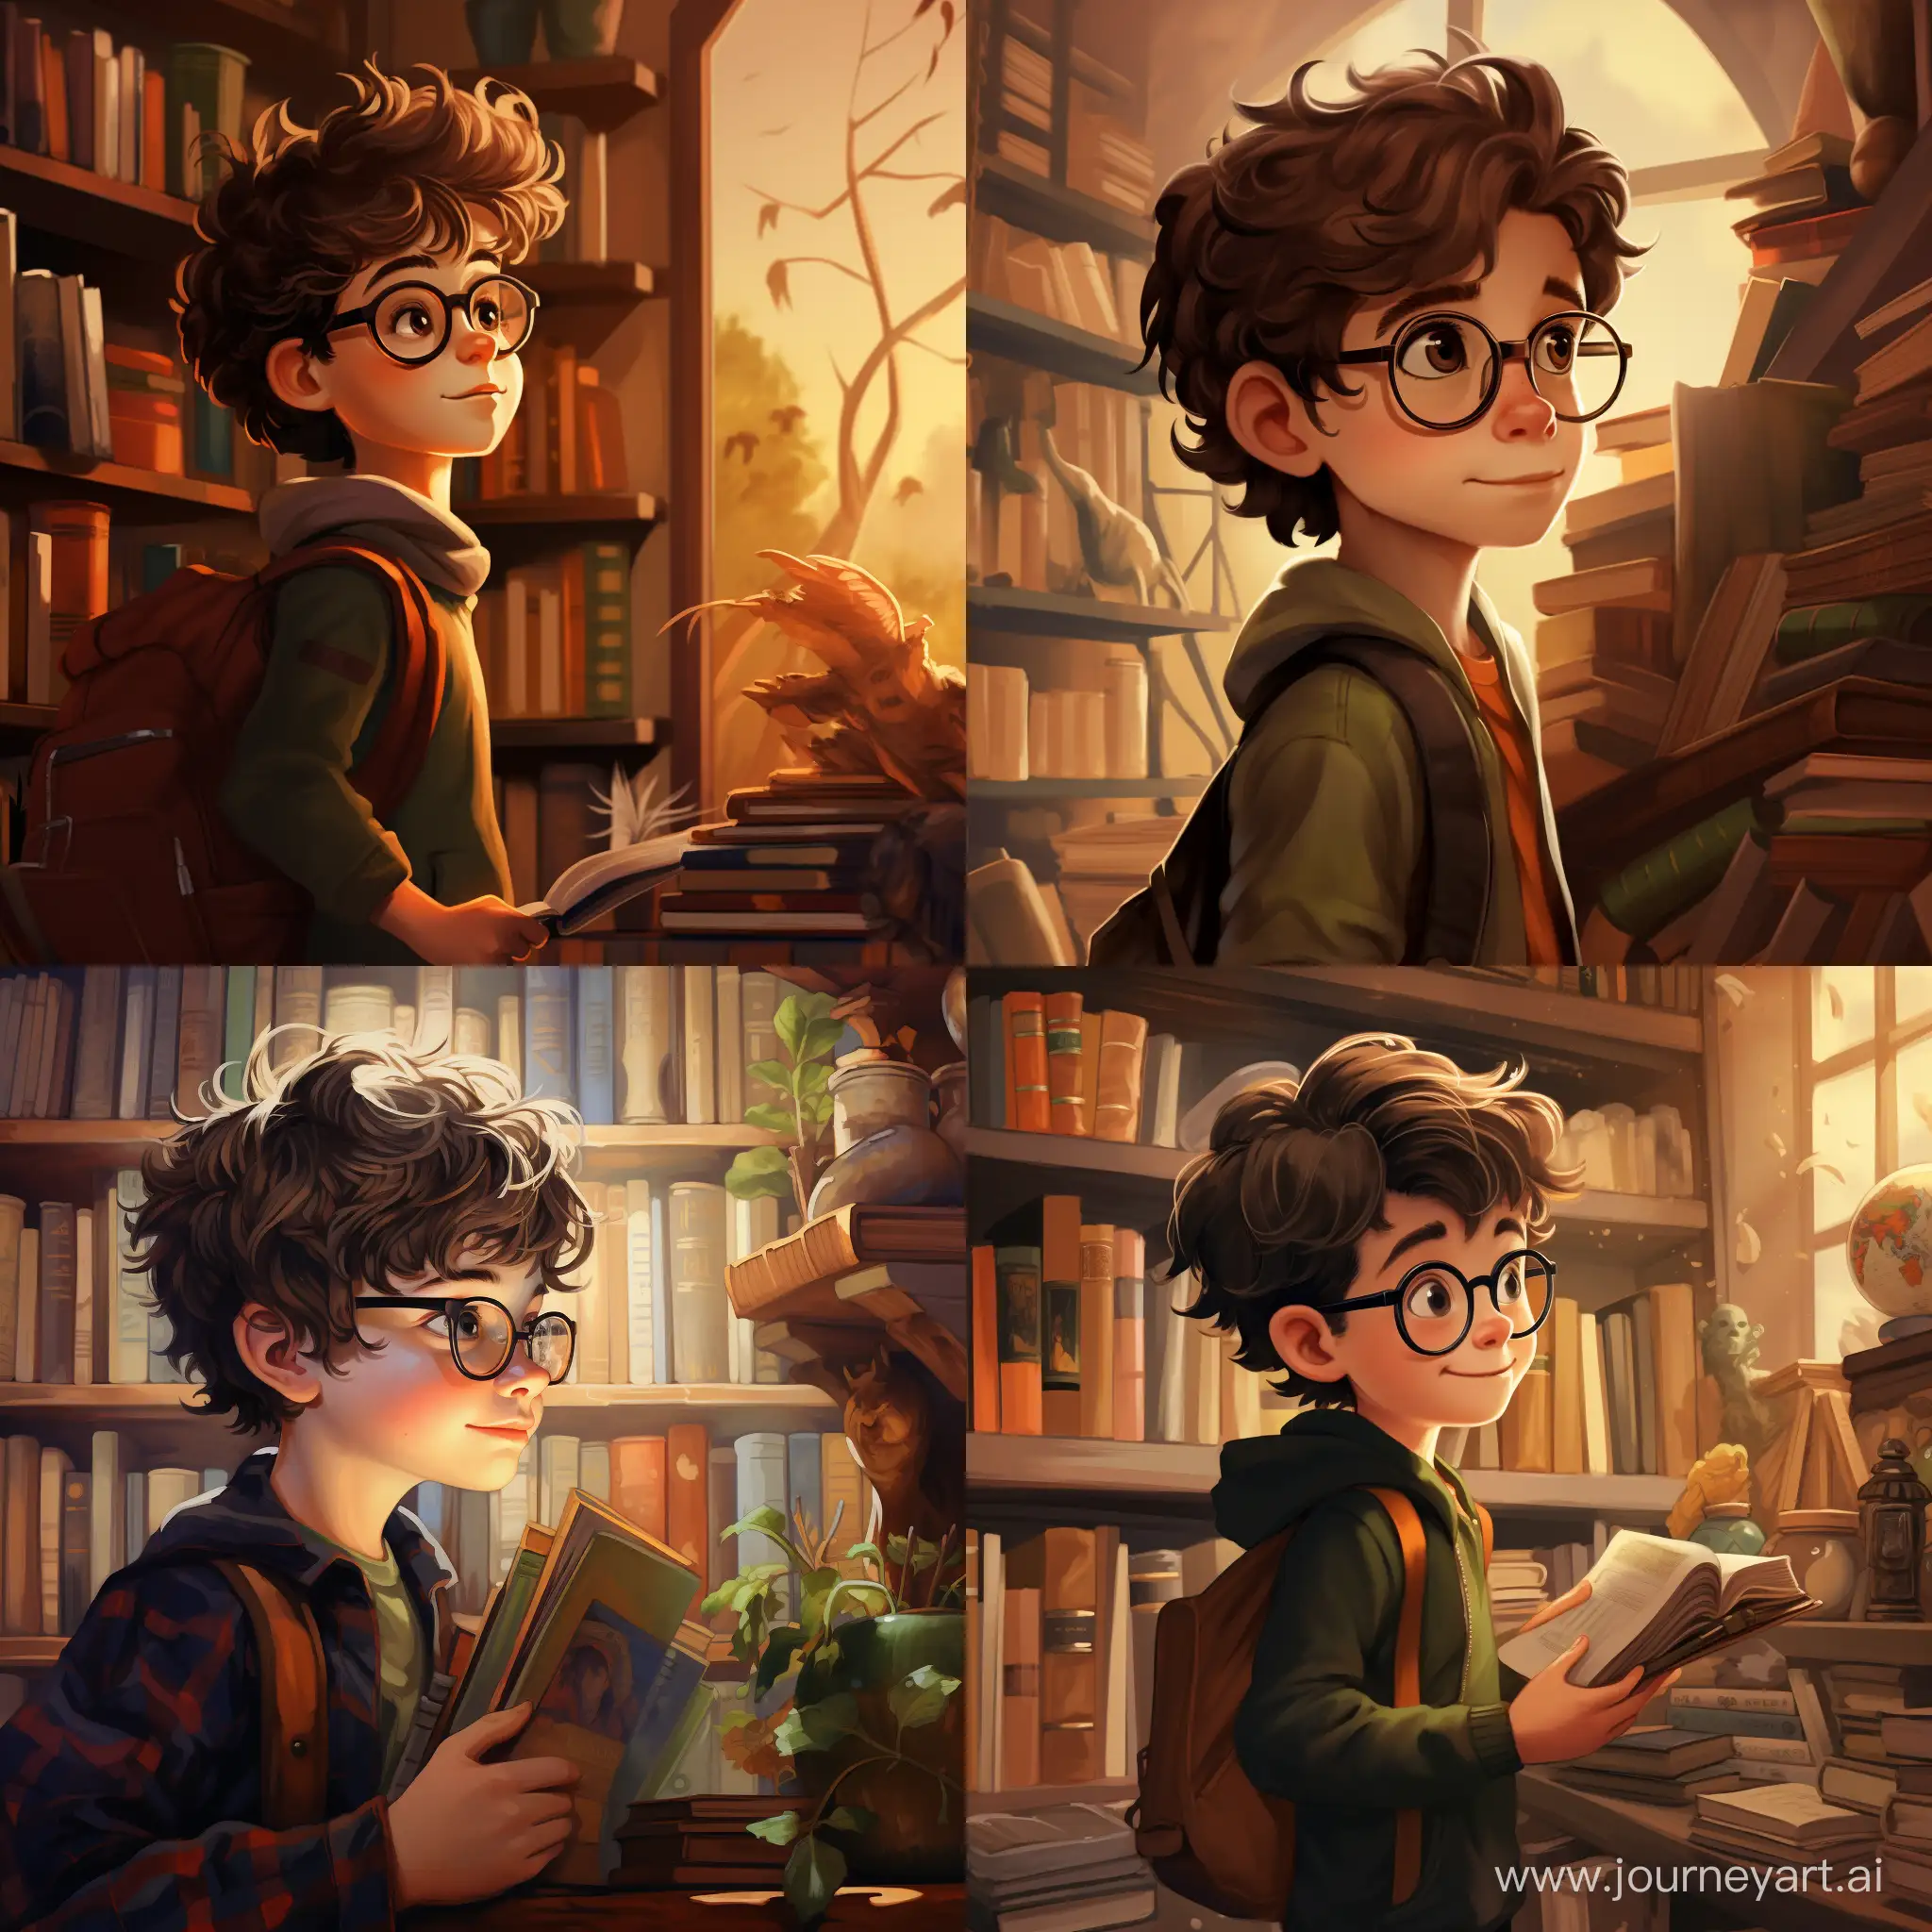 boy with brown hair and glasses looking on a shelf full of books